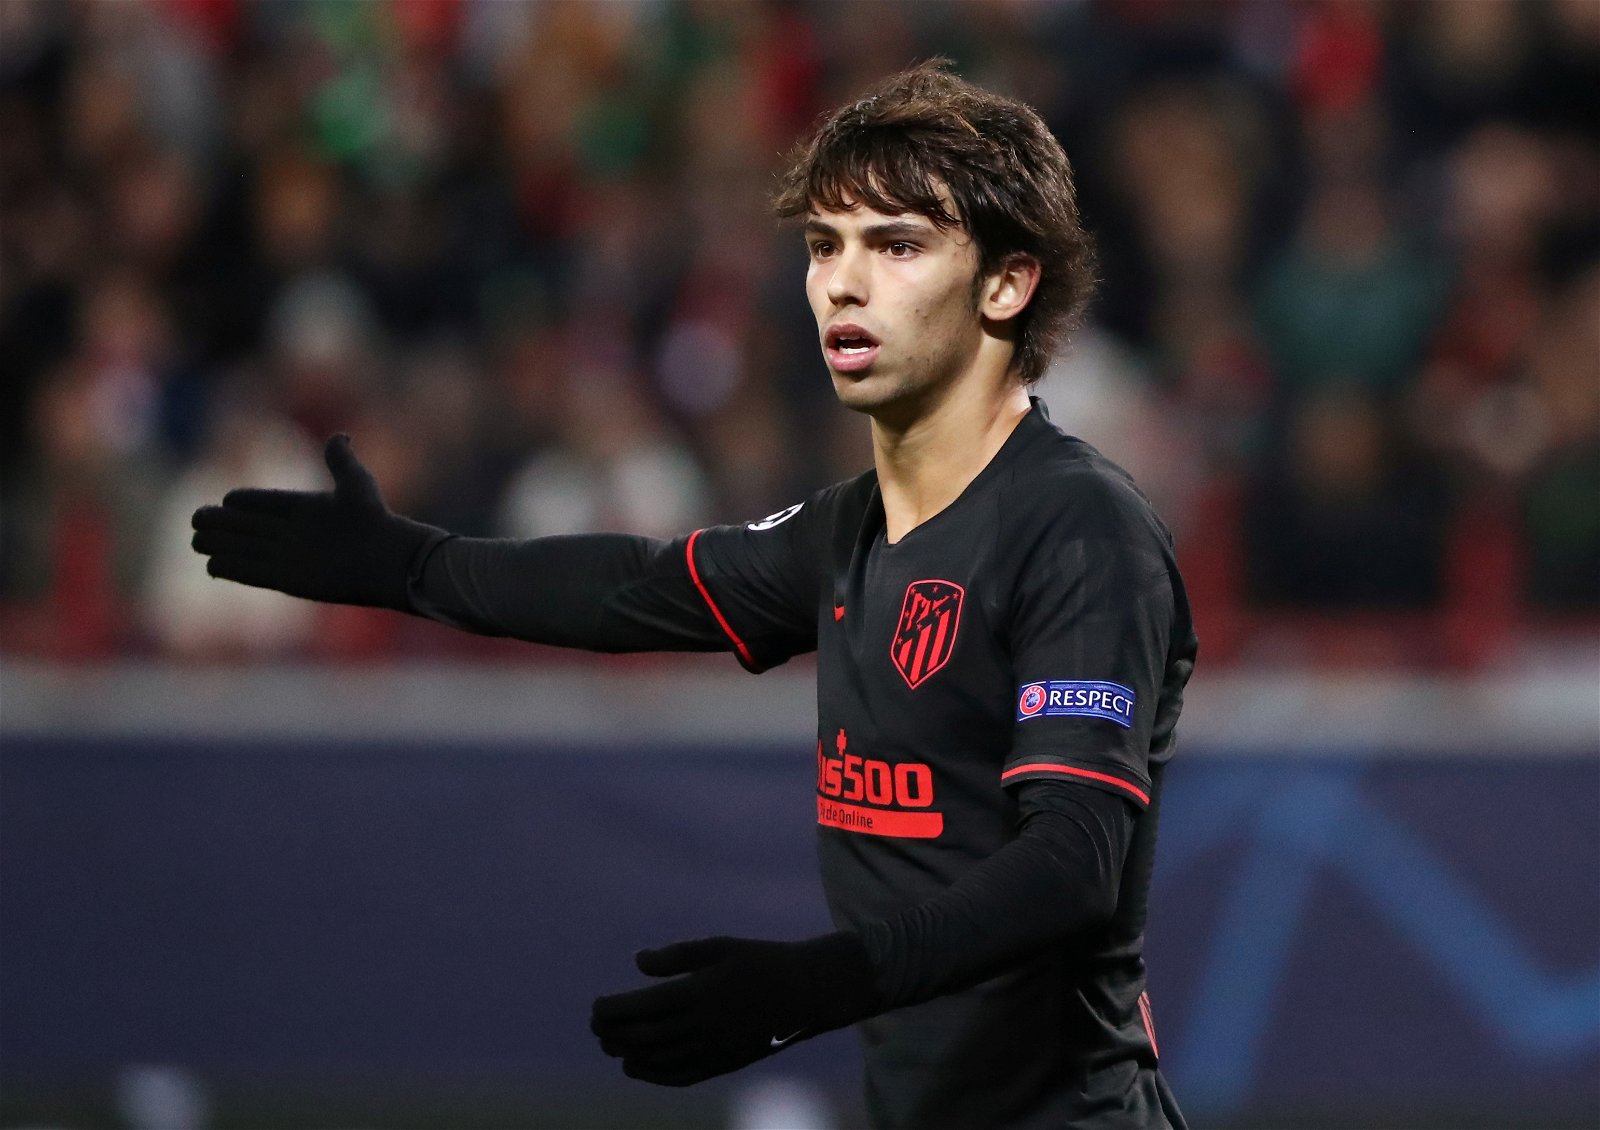 Atletico Madrid’s Joao Felix set for spell out with sprained ankle ligament